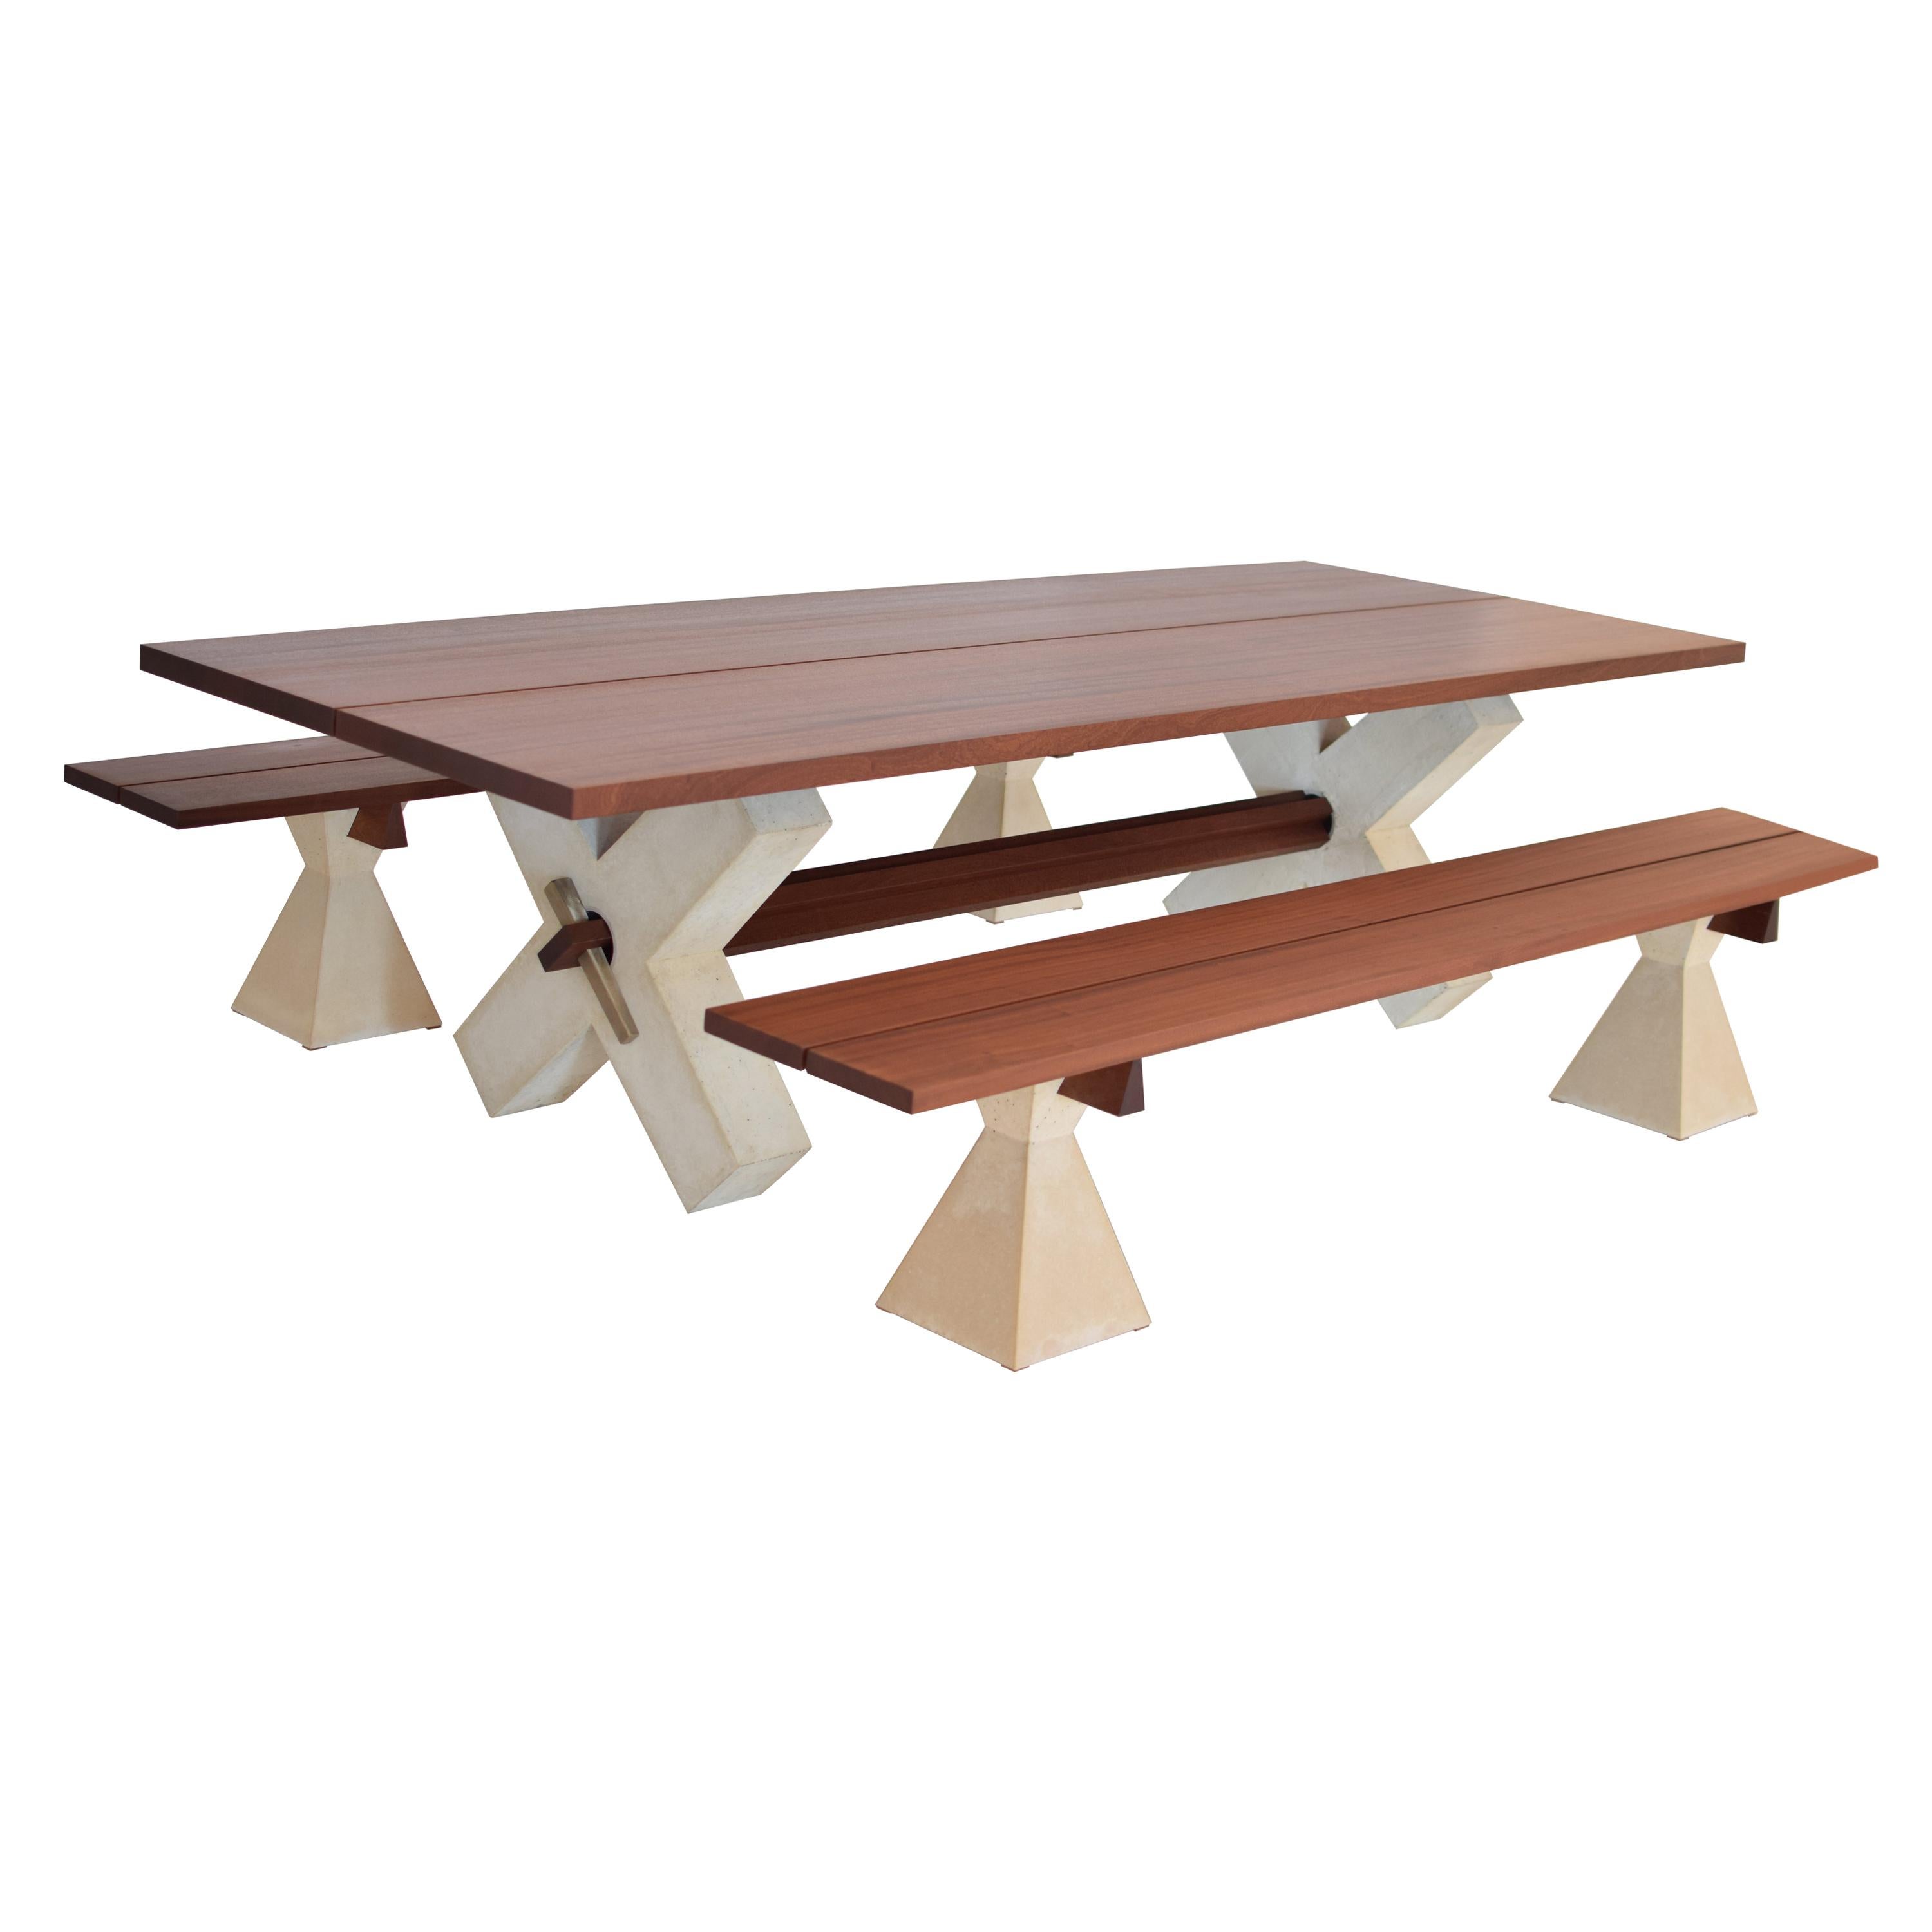 Modern Wood and Concrete Dining Table Set with Benches For Sale